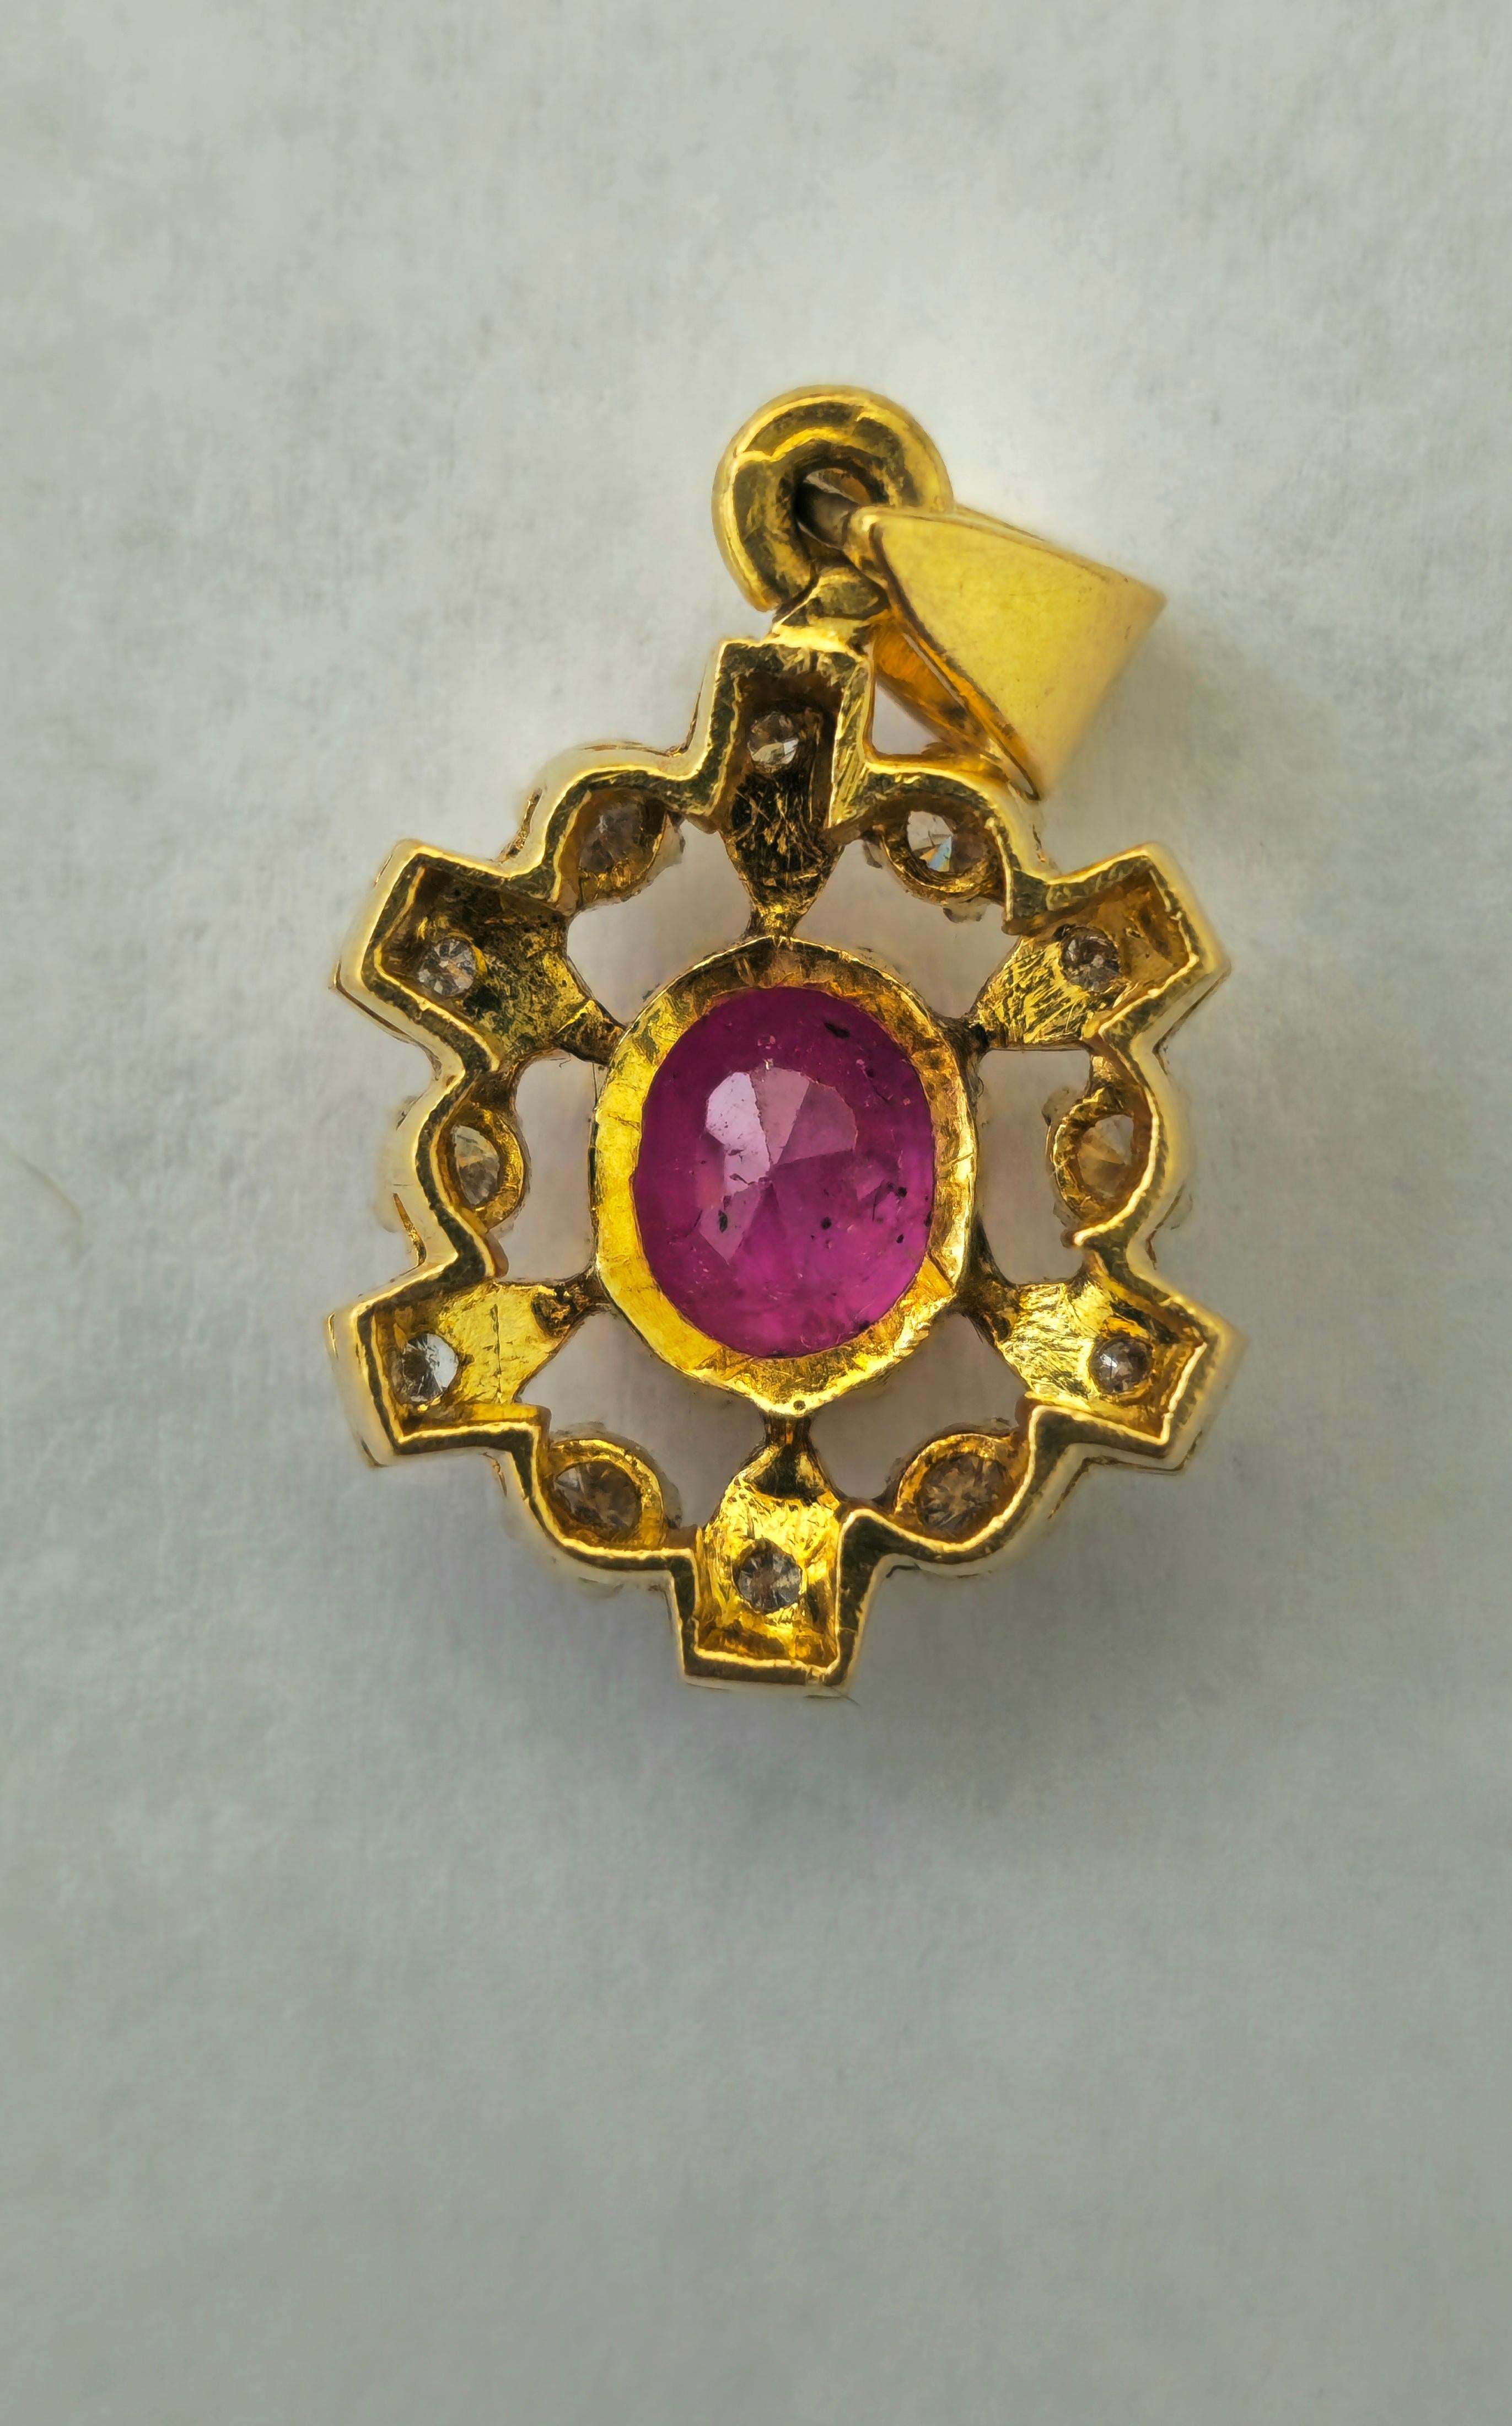 Elevate your style with this exquisite 18k yellow gold pendant featuring a stunning 1.06 carat natural ruby in an elegant oval shape. The ruby boasts good color and saturation, radiating beauty and sophistication. Surrounding the center stone are